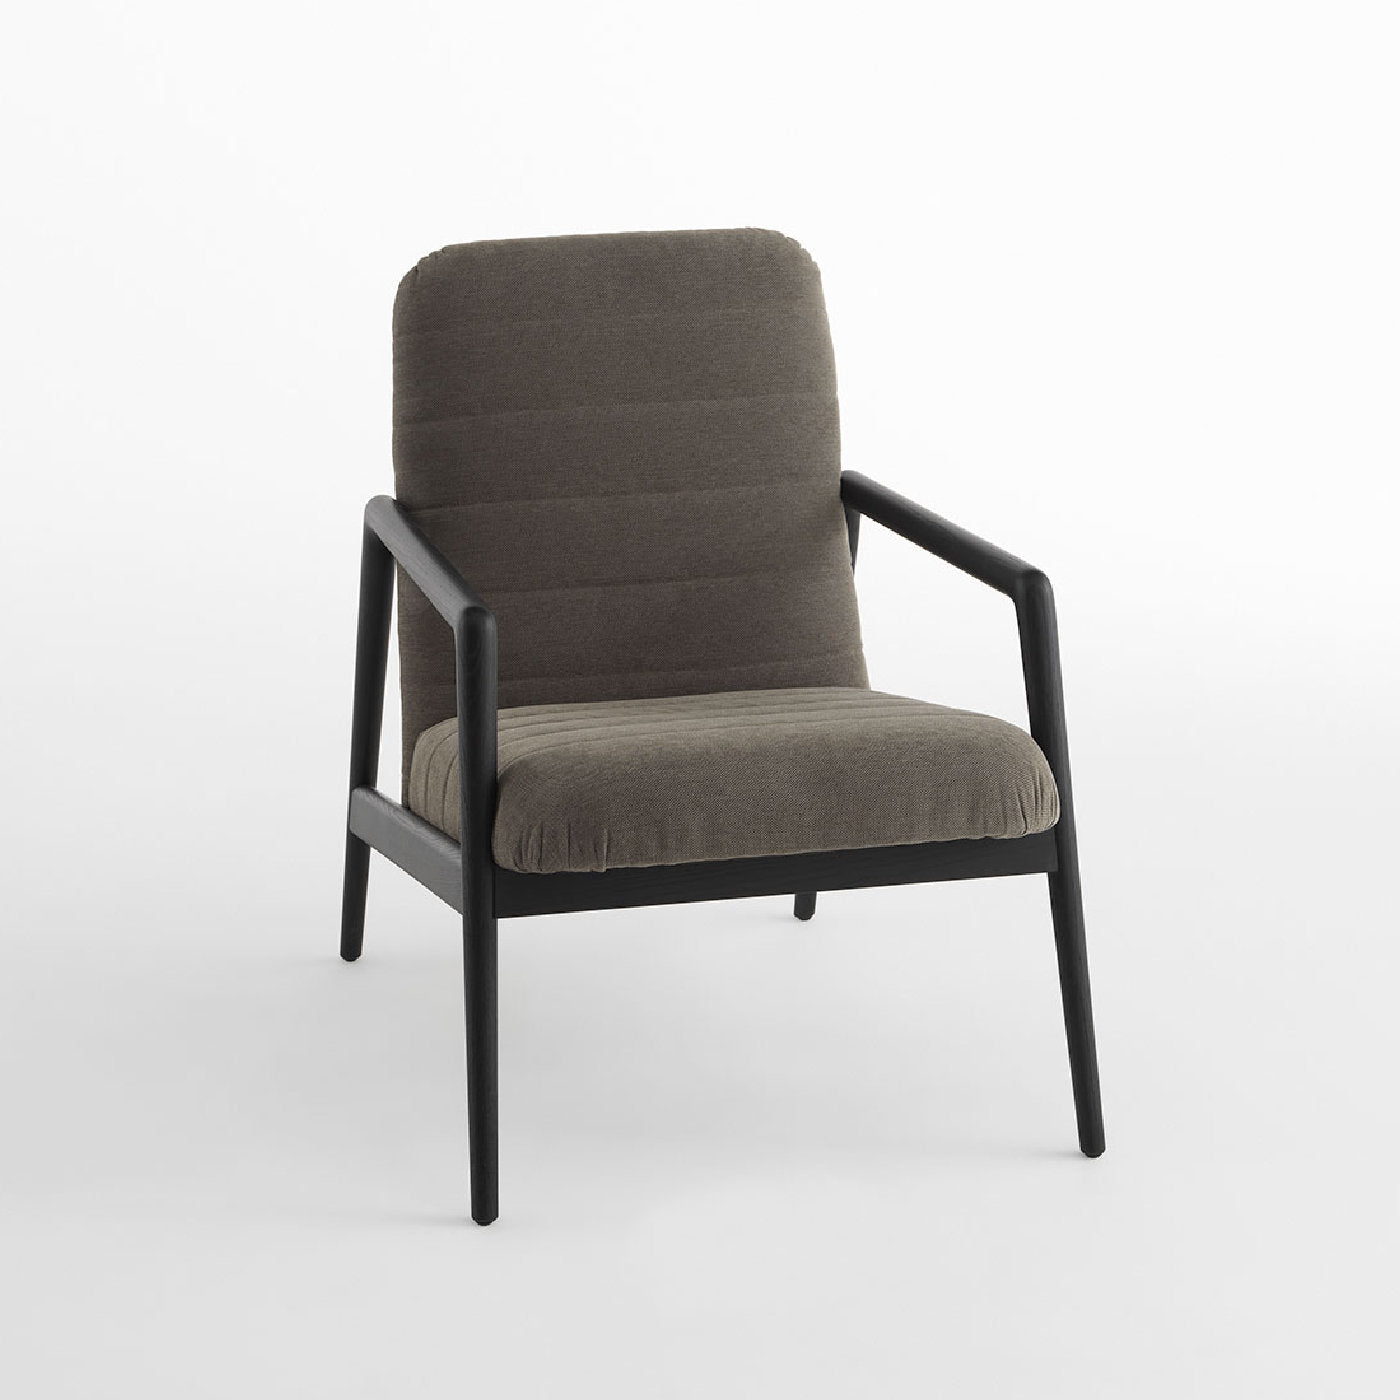 Carnaby Light Gray Armchair by Studio Balutto - Alternative view 1